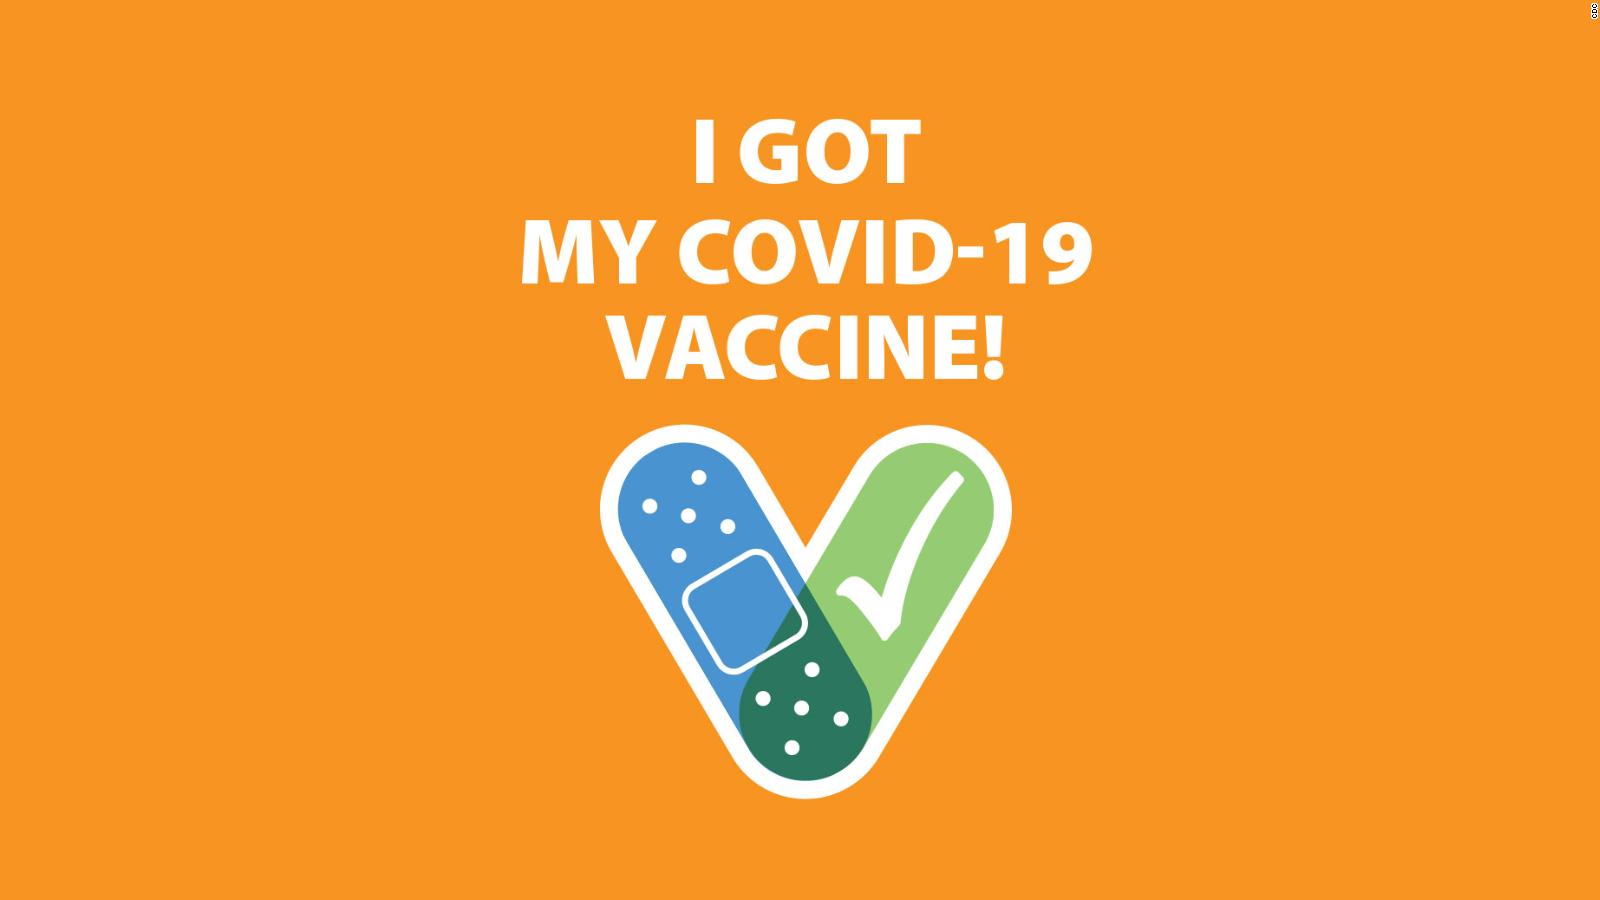 Covid19 vaccine stickers could encourage people to get vaccinated CNN